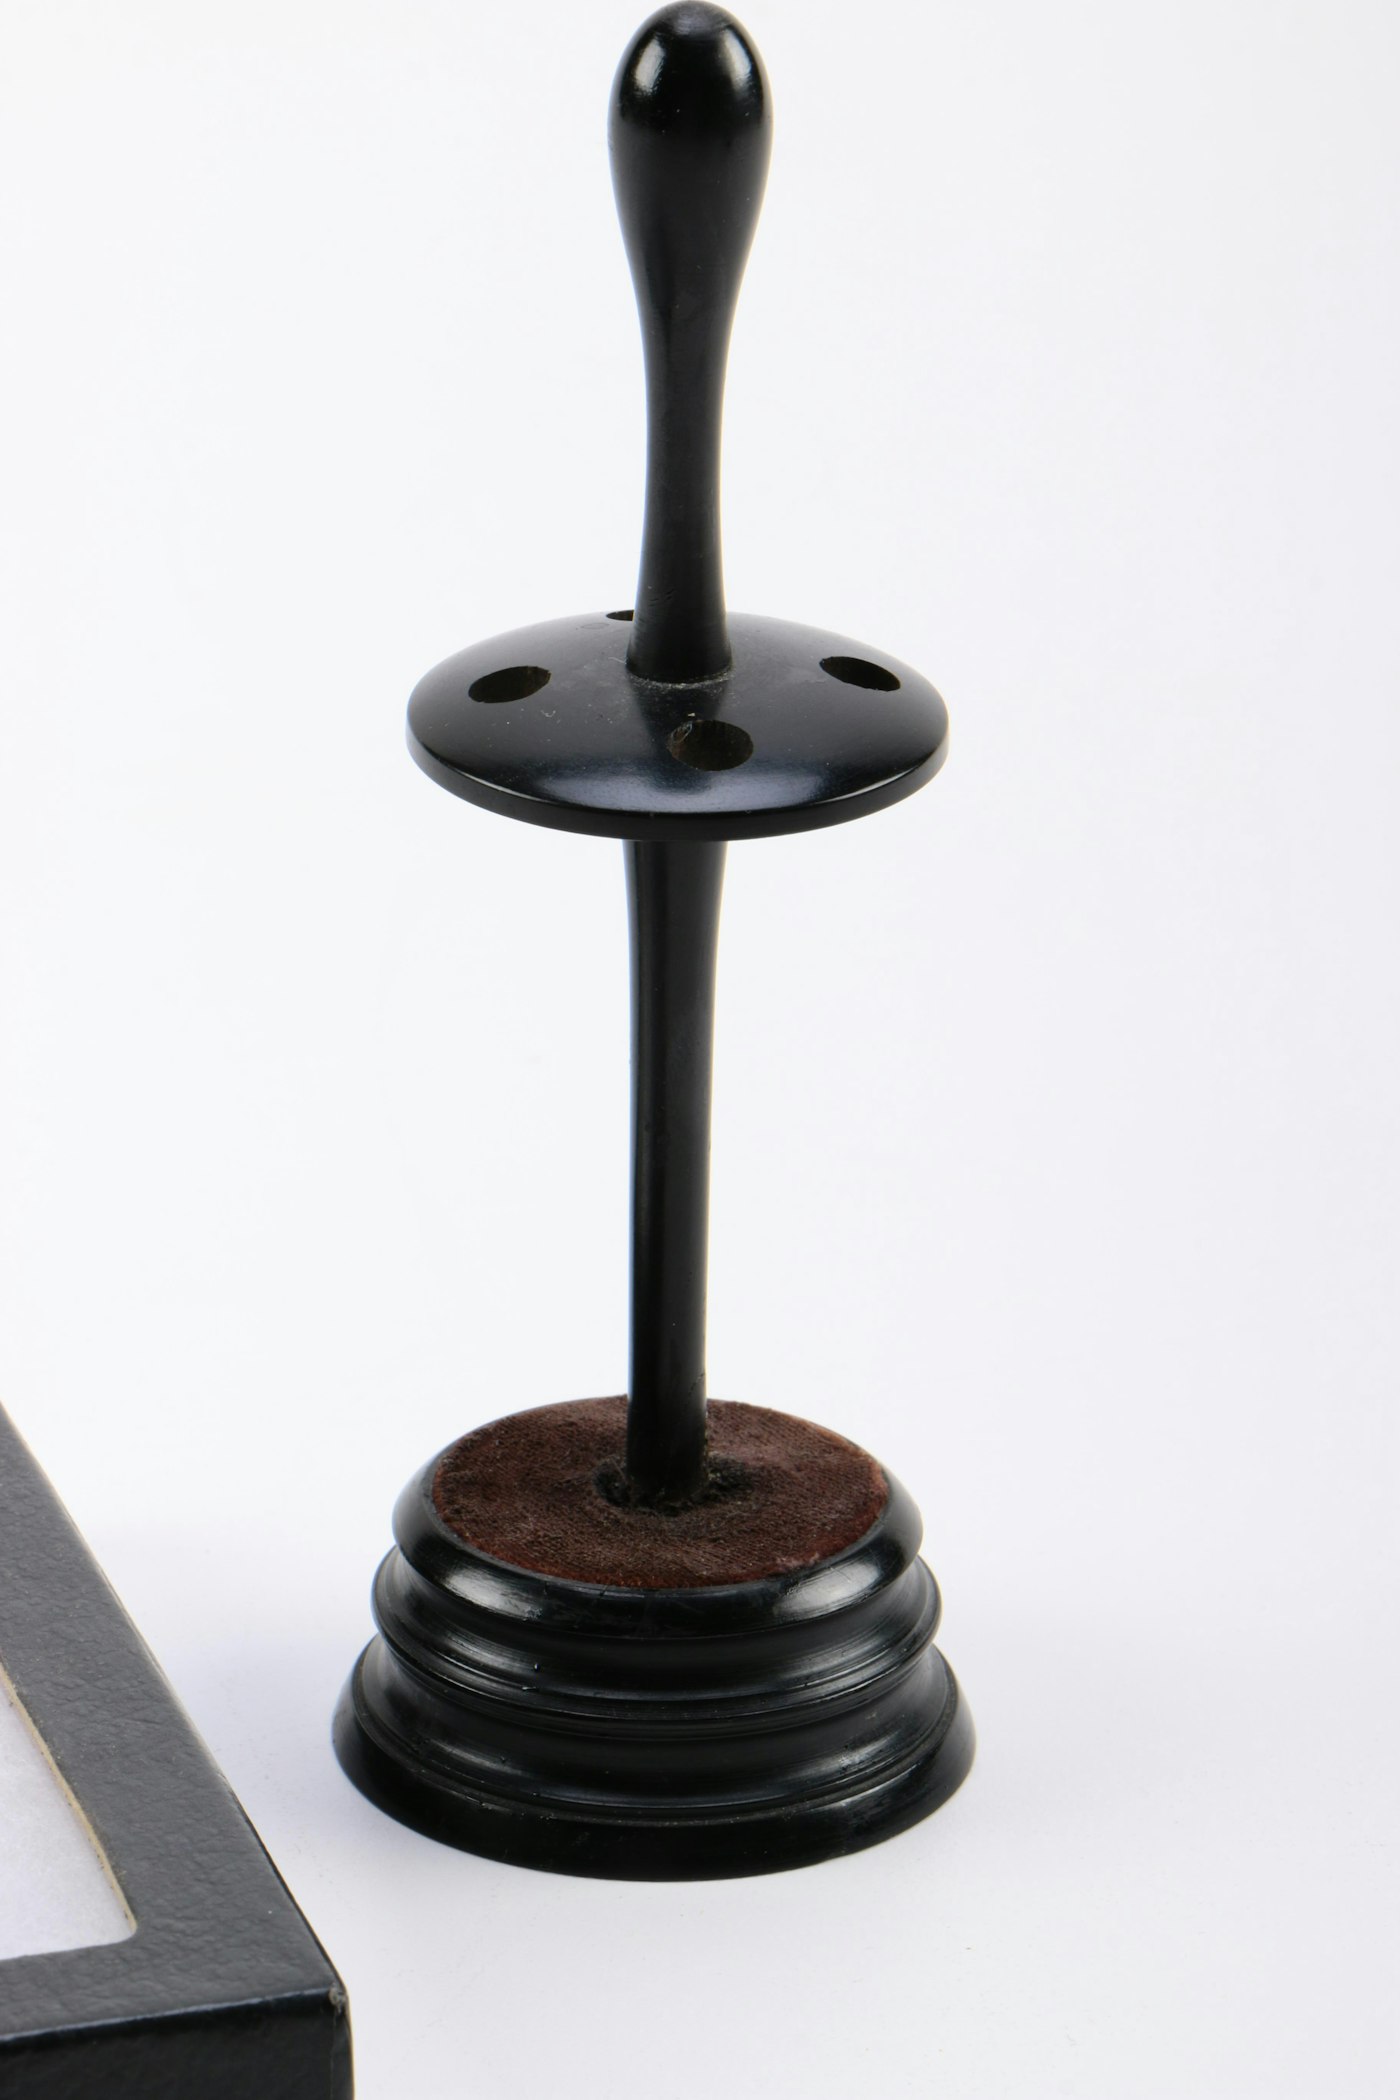 Ebony Hatpin Holder and Glass buttons | EBTH